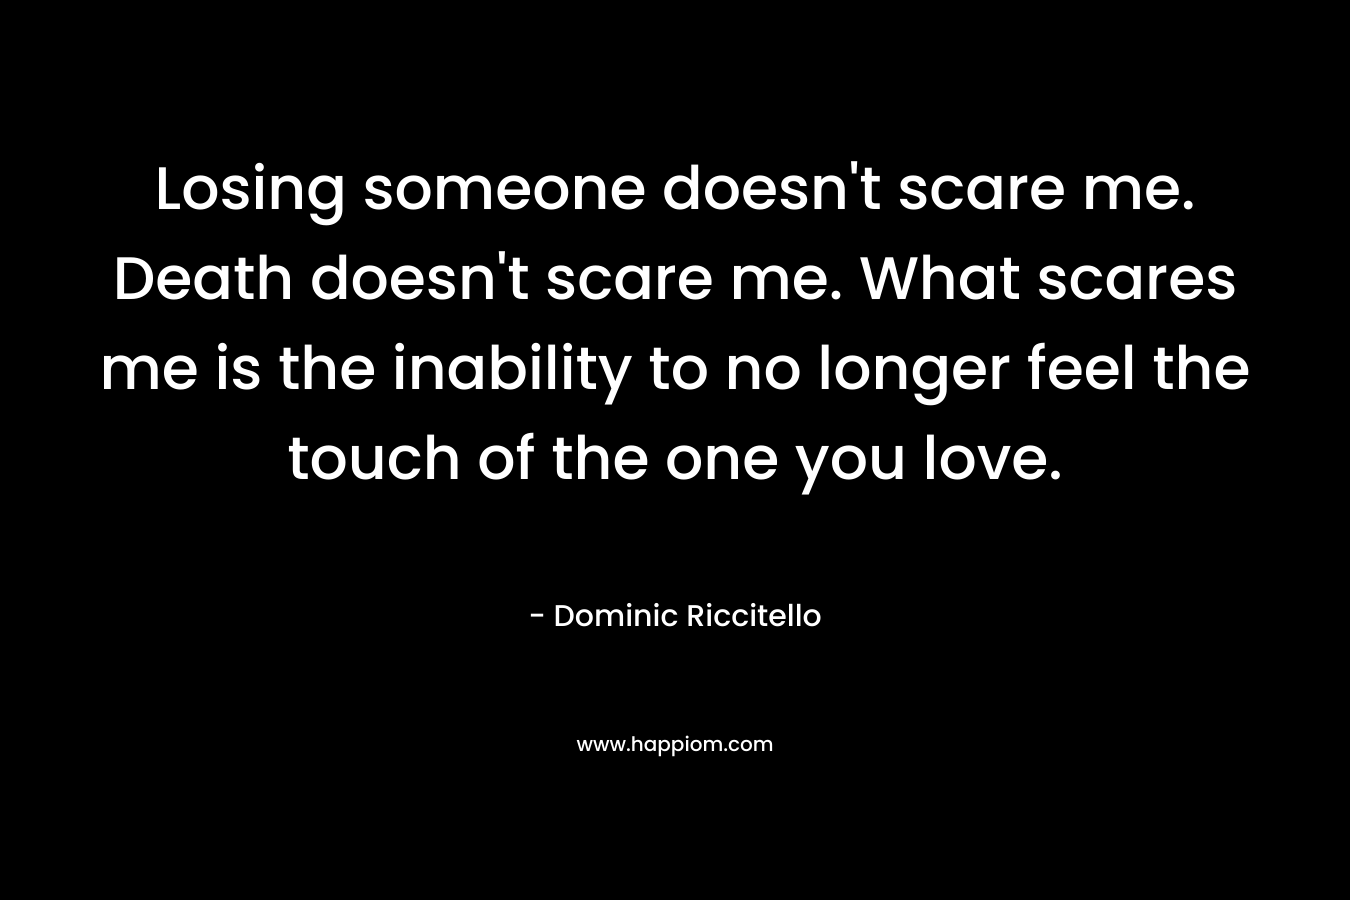 Losing someone doesn’t scare me. Death doesn’t scare me. What scares me is the inability to no longer feel the touch of the one you love. – Dominic Riccitello